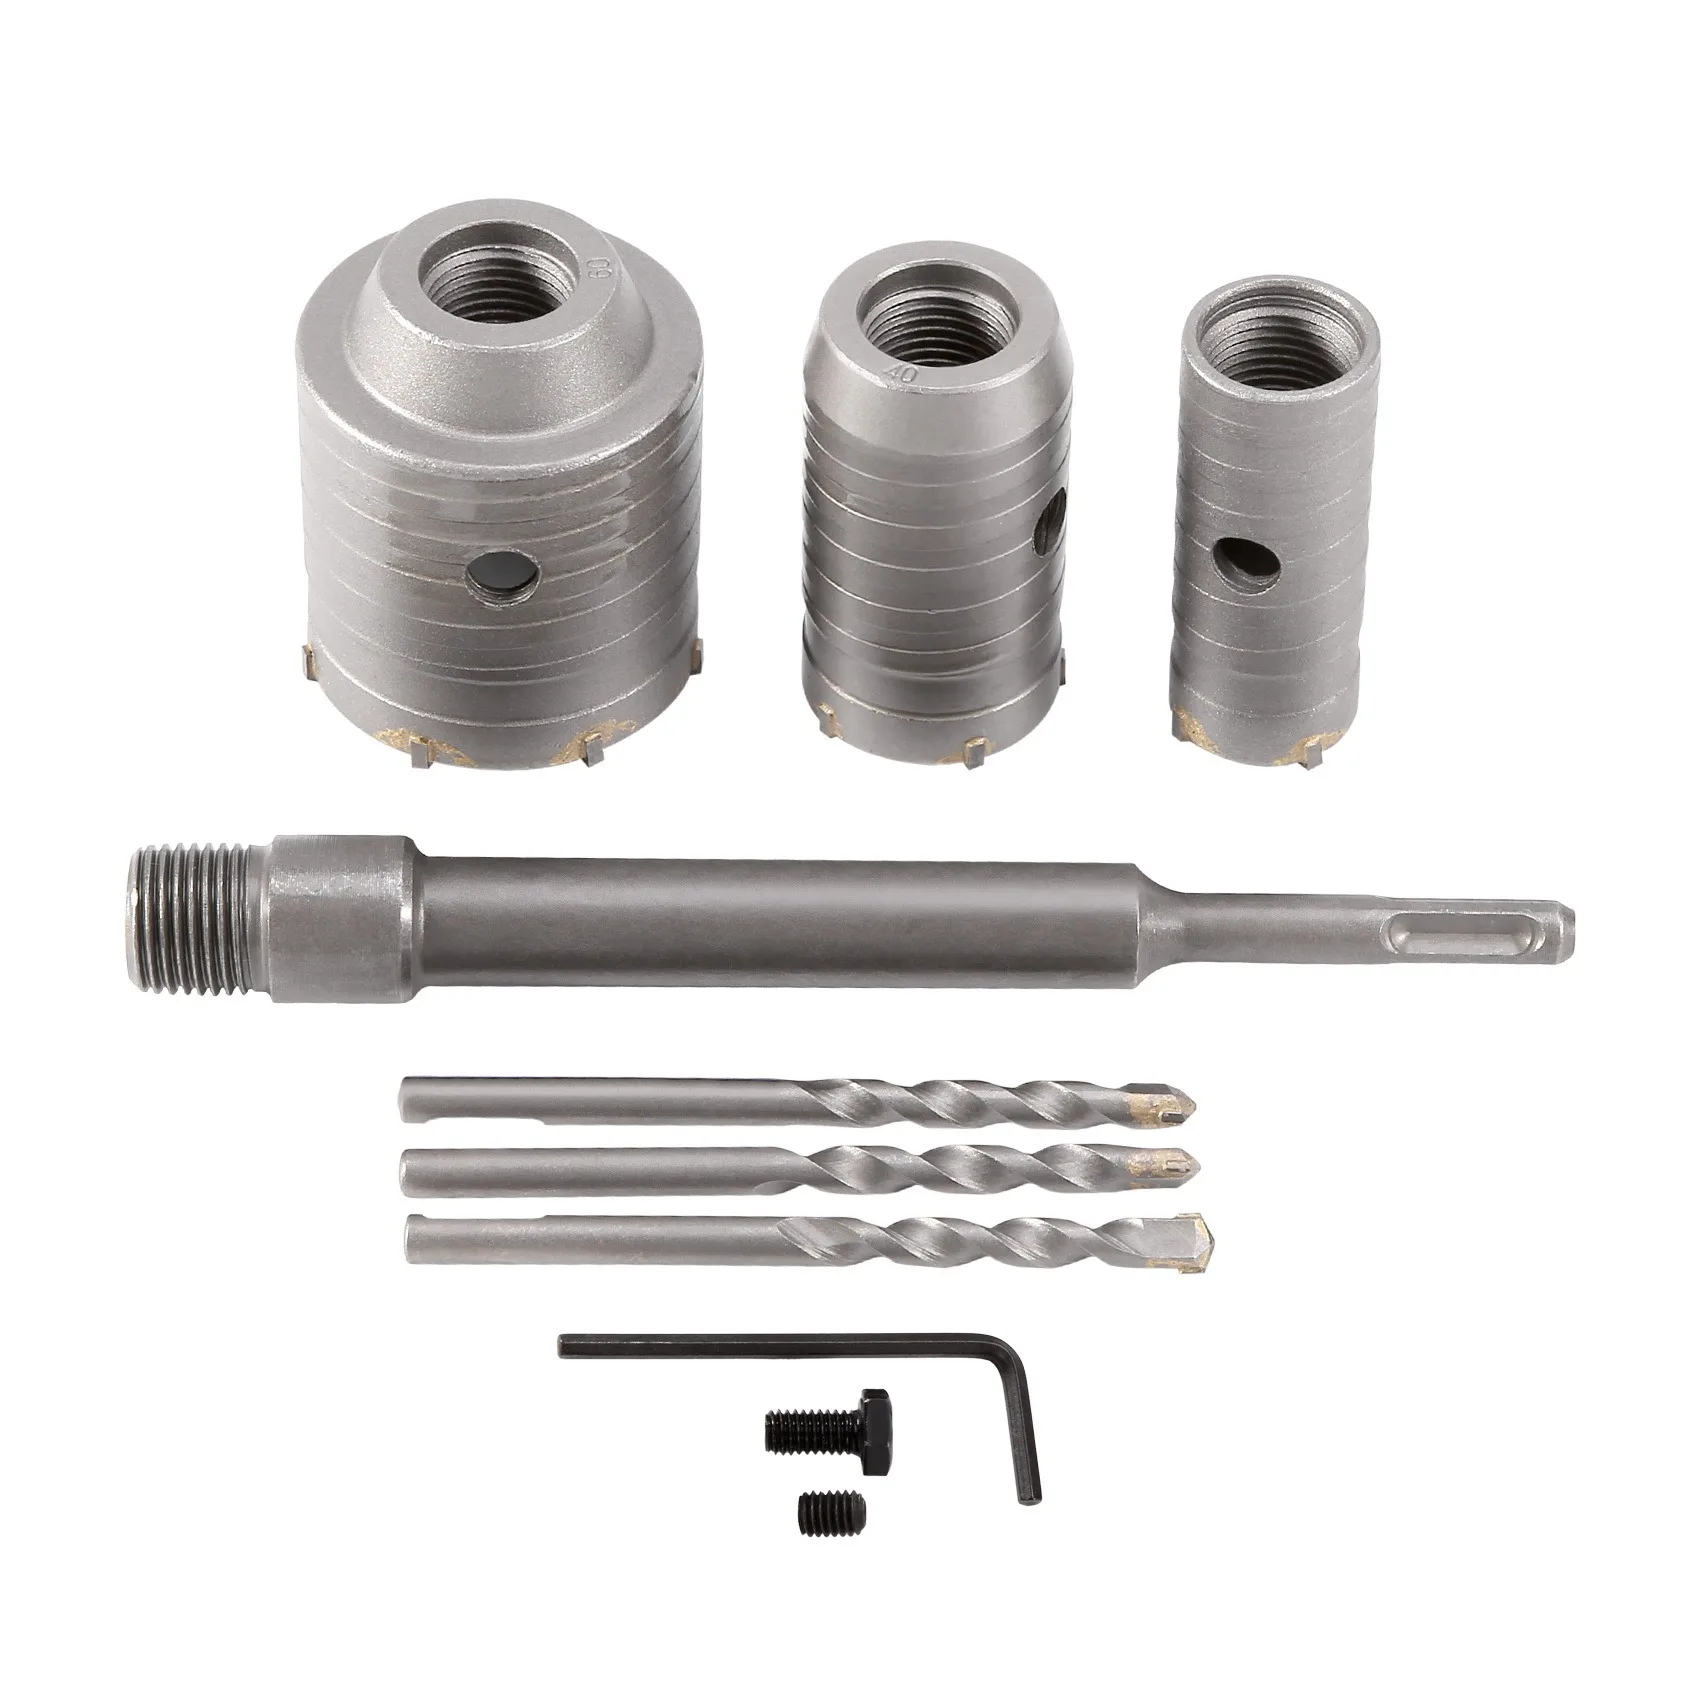 

Concrete Hole Saw Kits SDS Plus Shank Wall Hole Cutter Cement Drill Bit Sets(30, 40, 60mm), with 220mm Connecting Rod